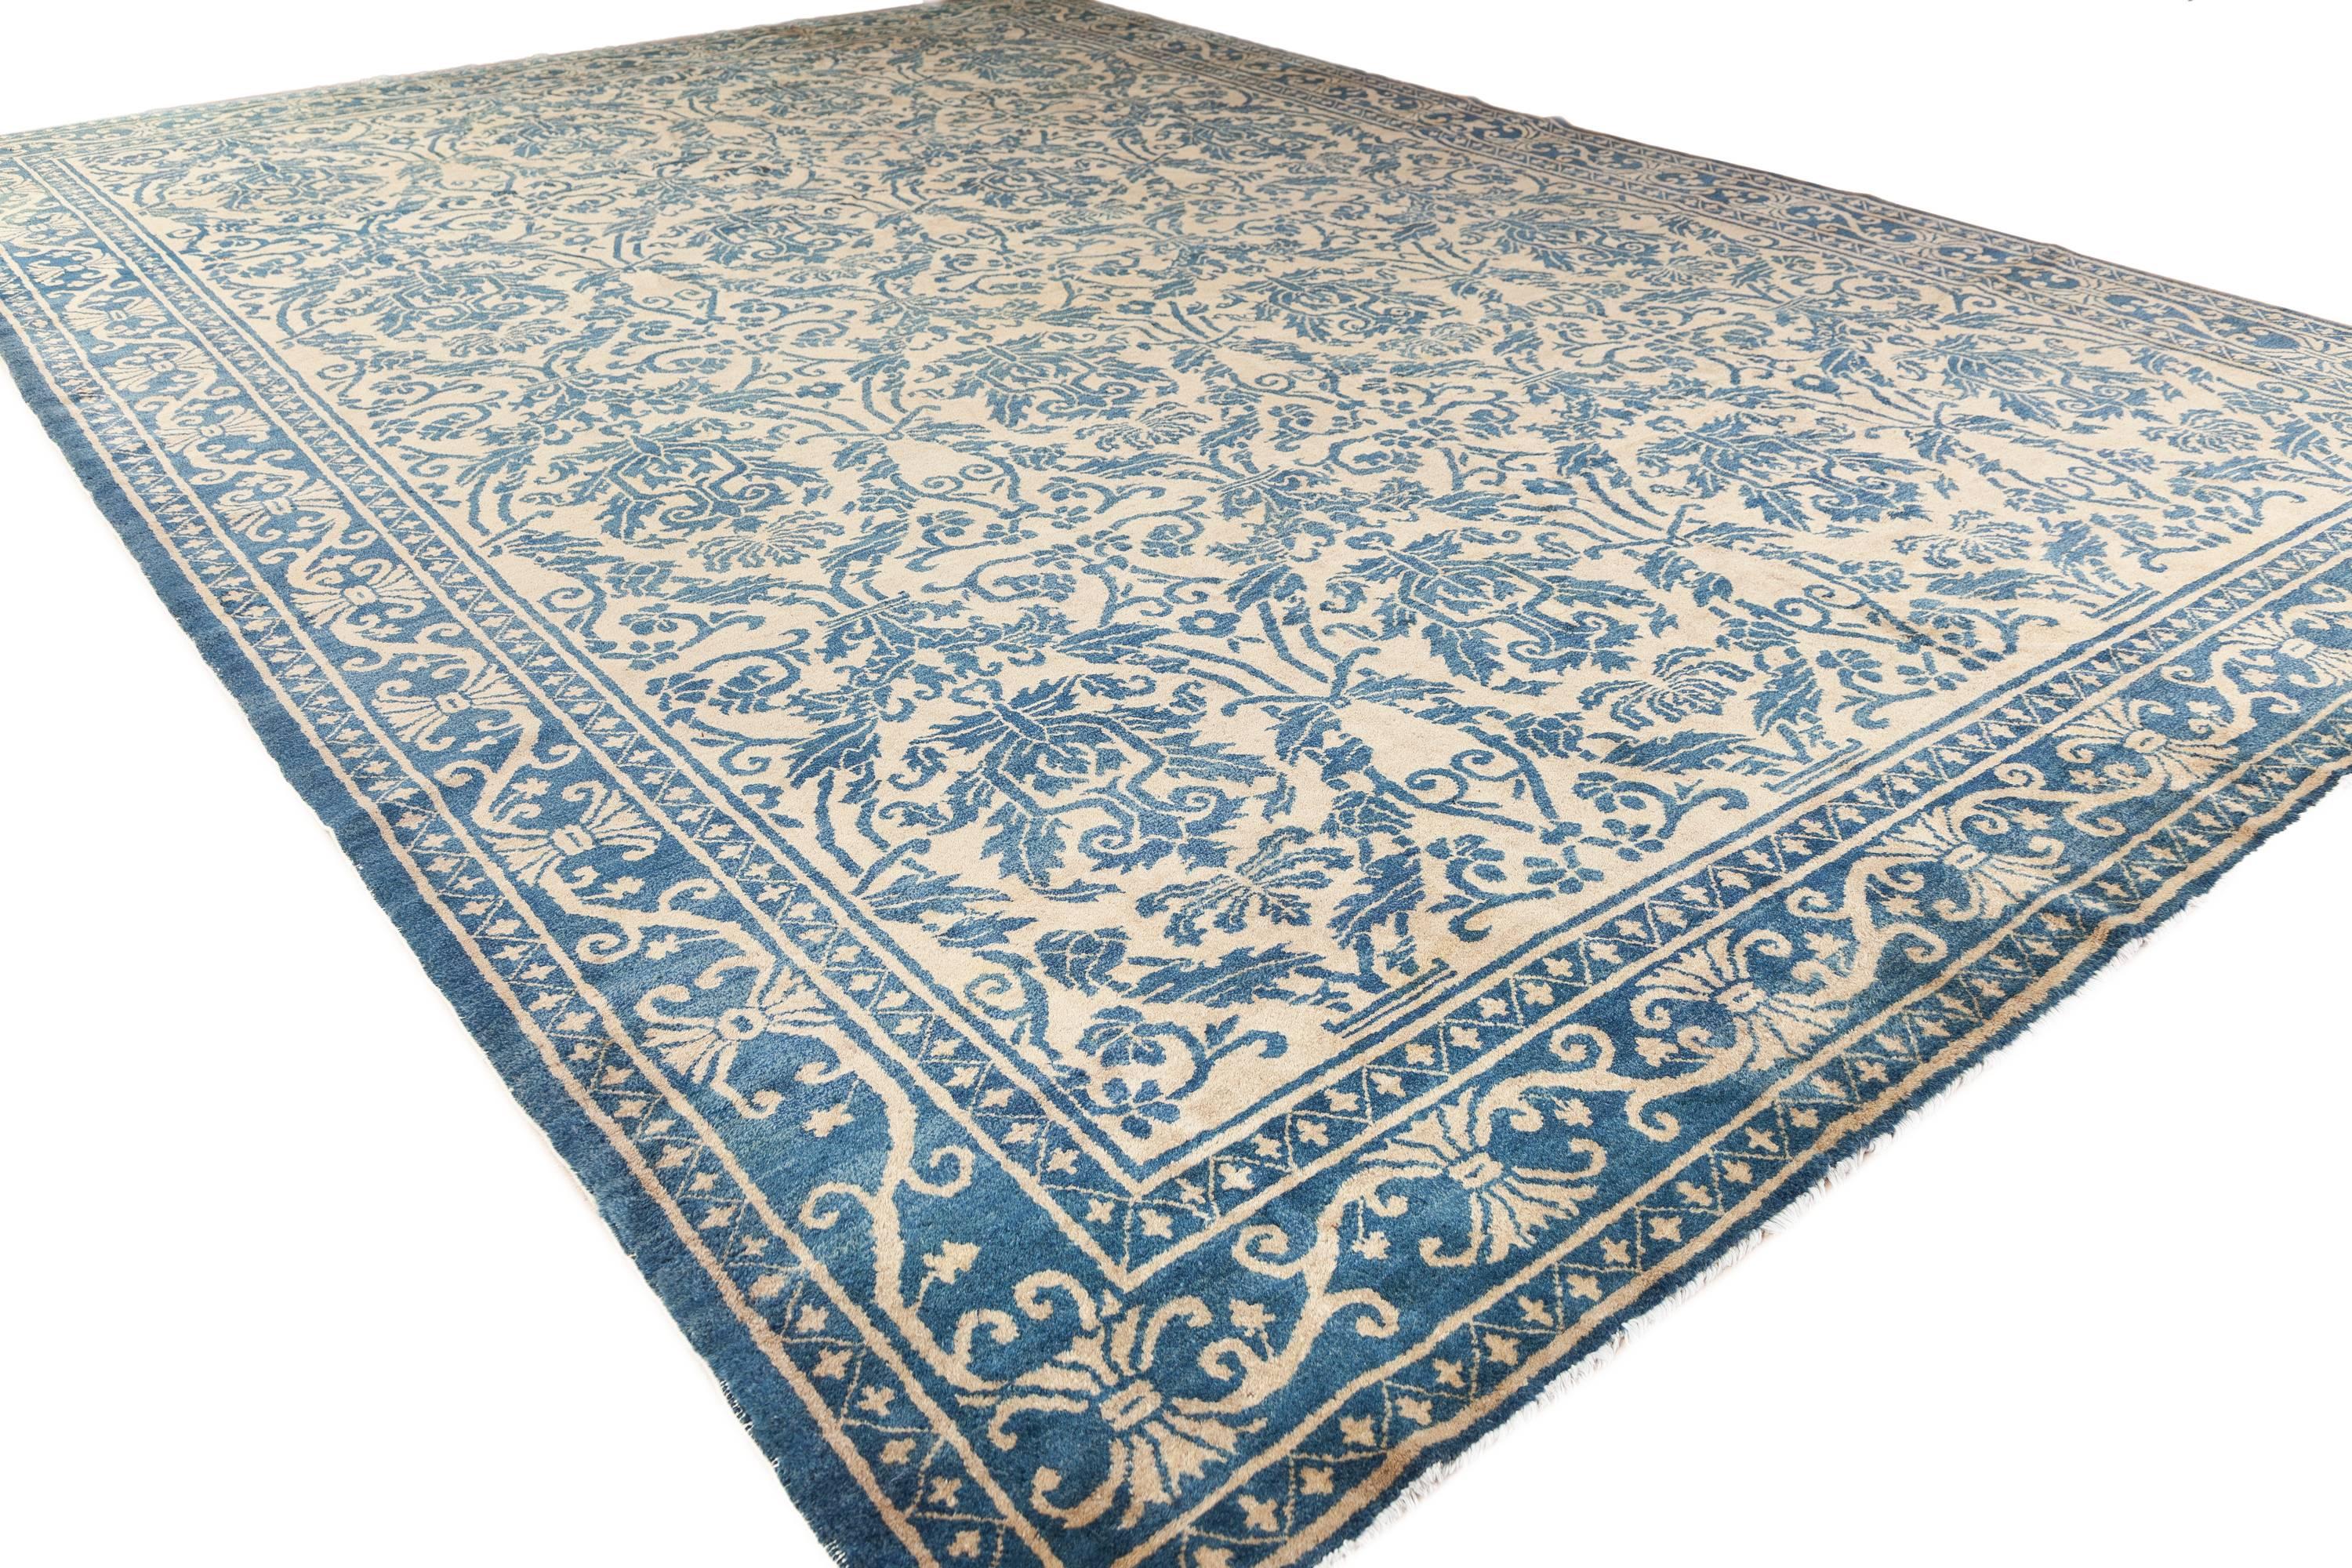 An antique Peking Chinese rug of a classic Hispano-Moresque design, from the first quarter of the 20th century. Both classic and contemporary with a very interesting blue and ivory design.